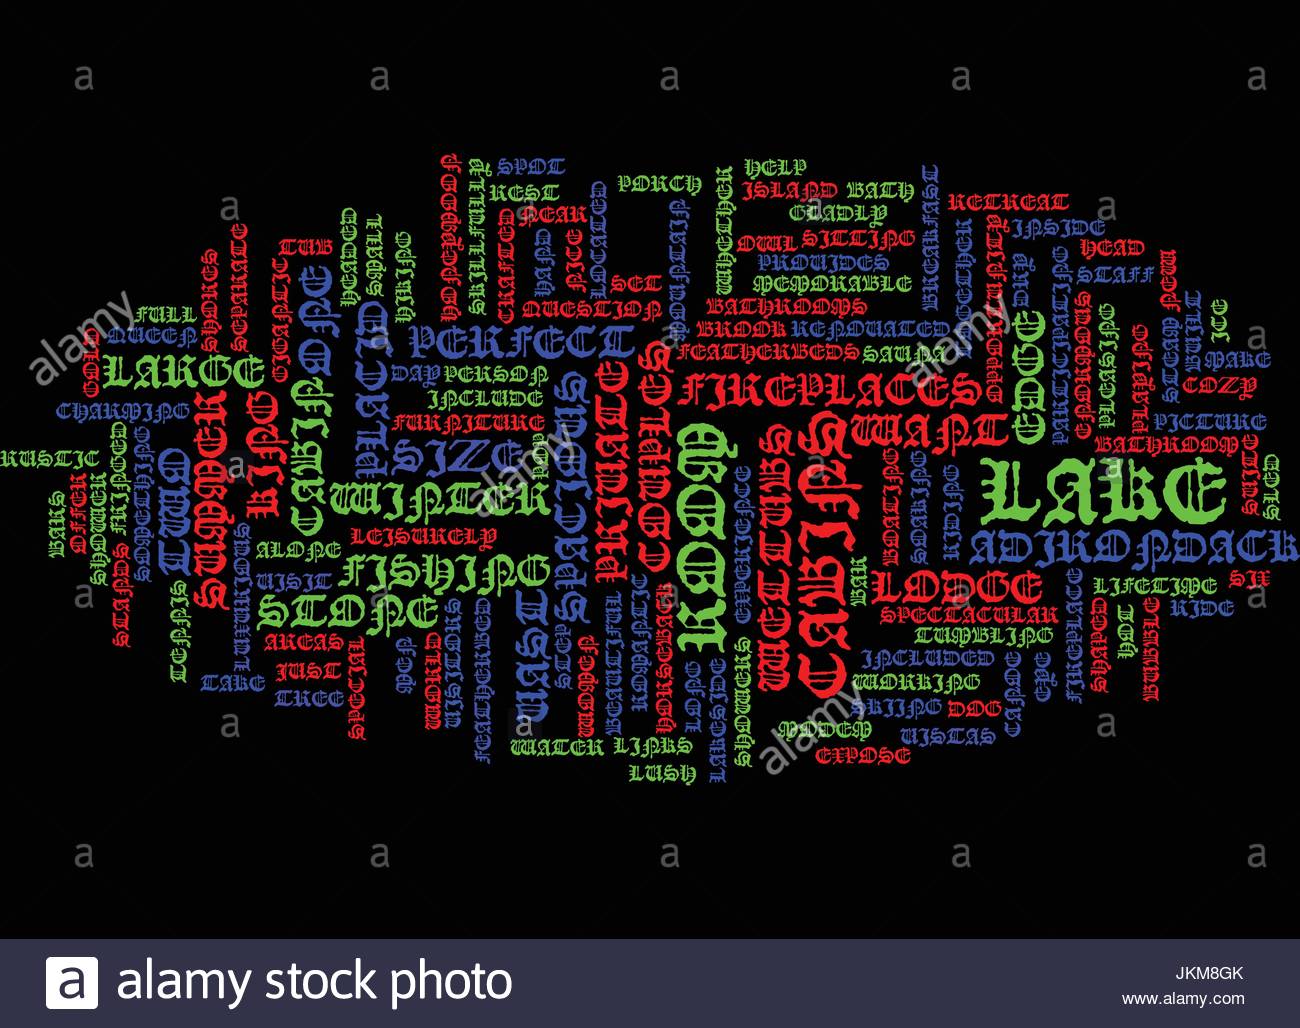 Lake Placid Lodge Text Background Word Cloud Concept Stock Vector